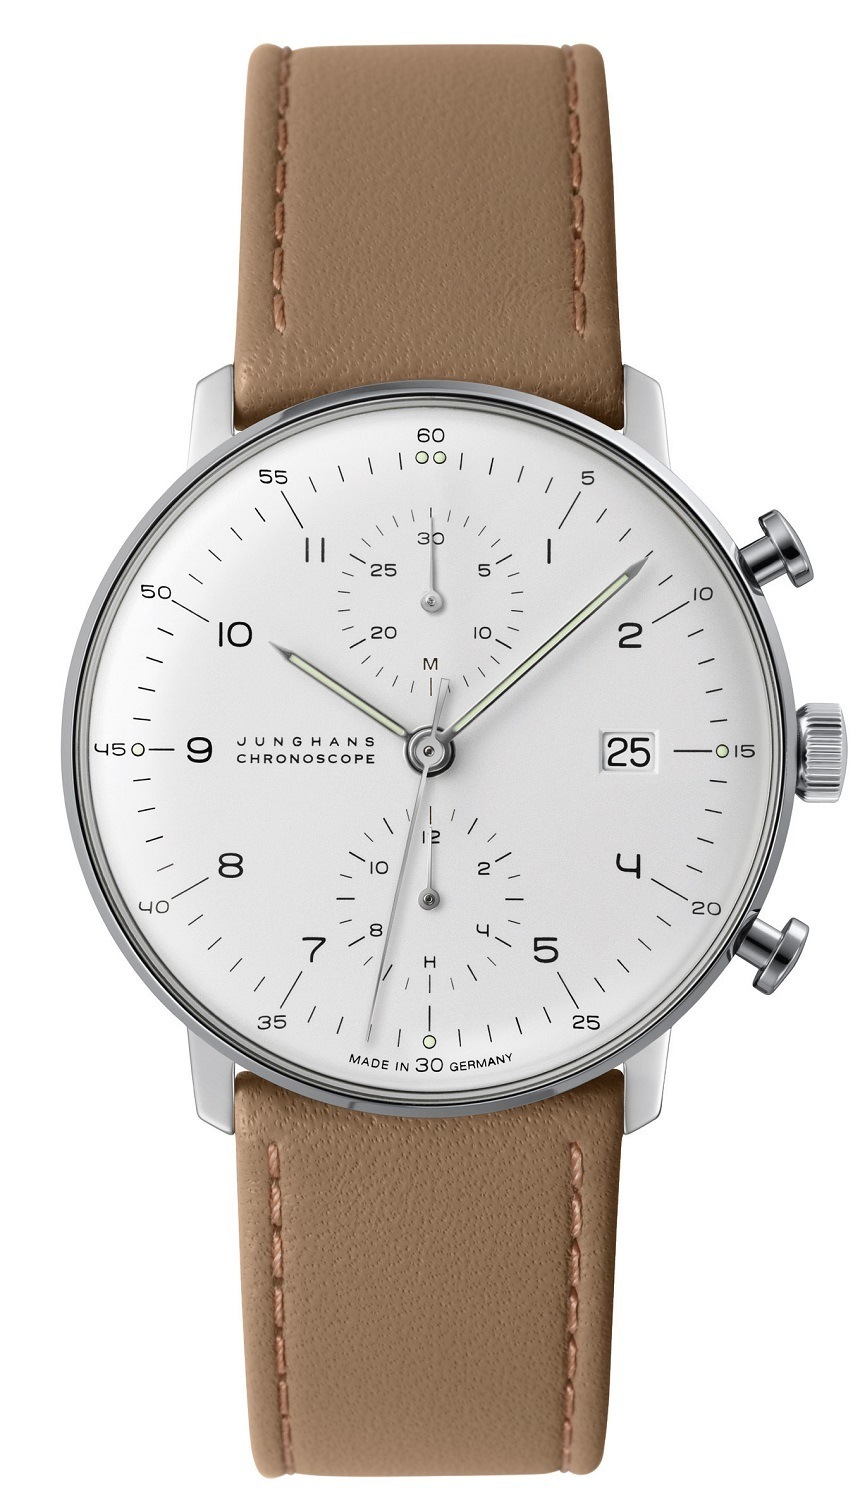 Junghans Max Bill Watch Range Updated For 2015 | aBlogtoWatch